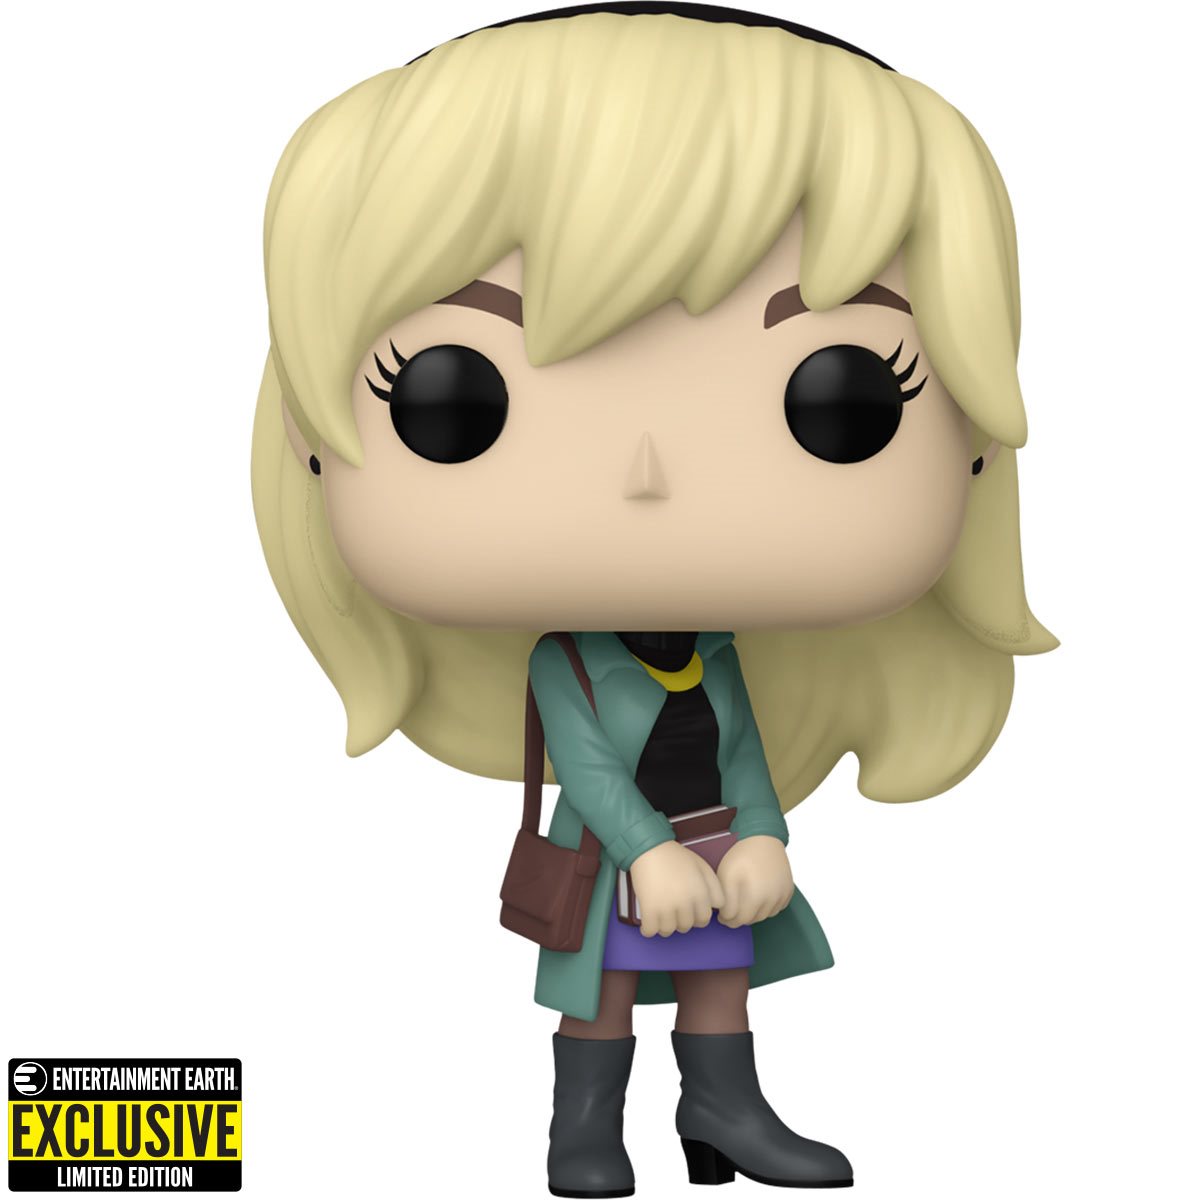 Spider-Man Gwen Stacy Funko Pop!- Entertainment Earth Exclusive